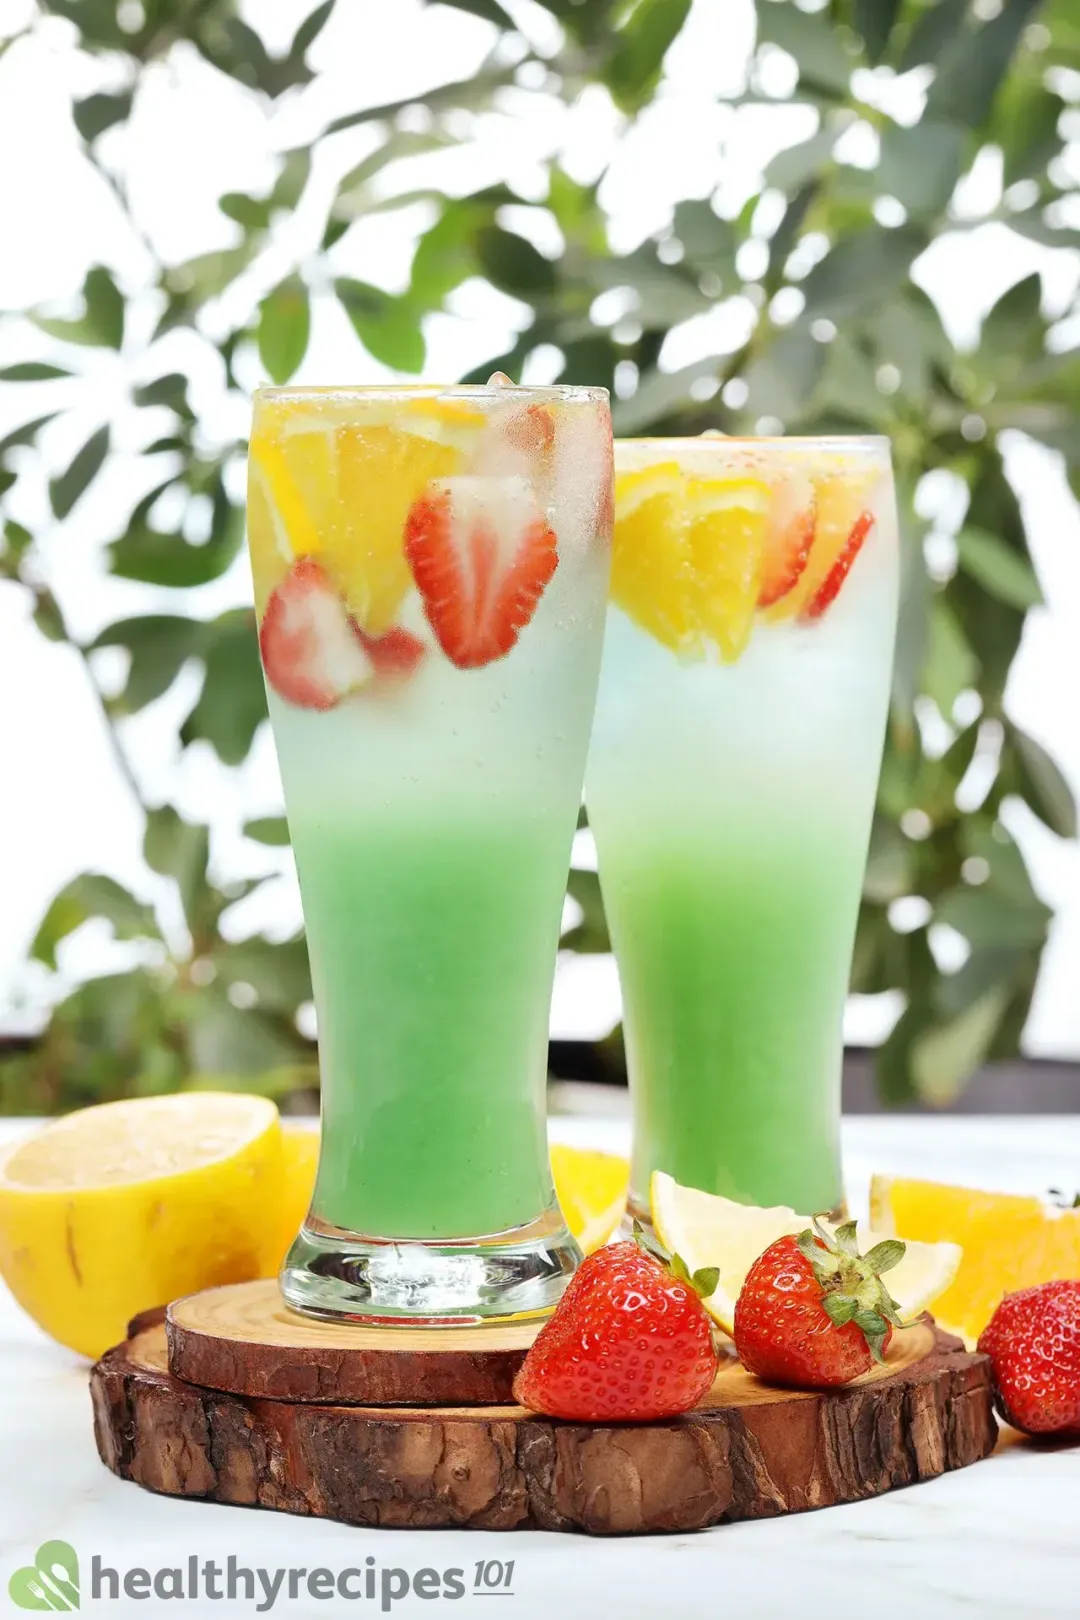 Two gradient green jungle juice glasses surrounded by strawberries and lemon wedges placed on tree trunk slices